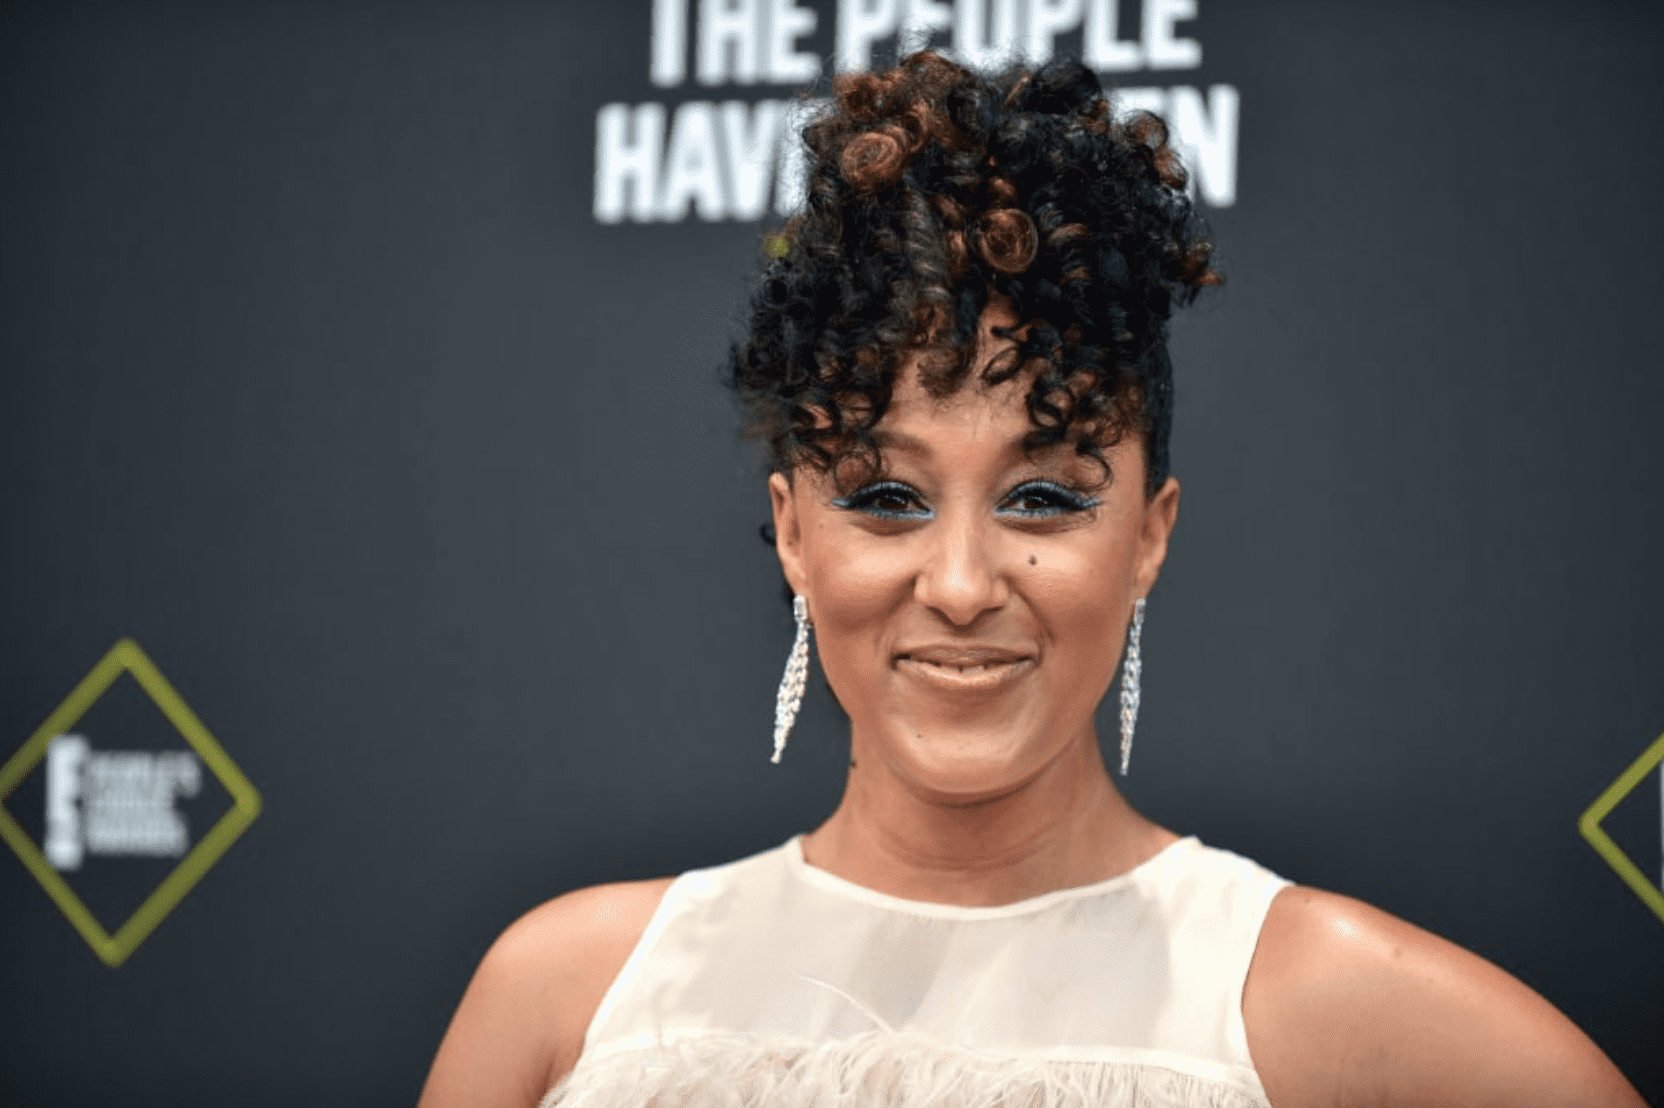 Tamera Mowry-Housley at the 2019 E! People's Choice Awards on November 10, 2019. | Source: Getty Images